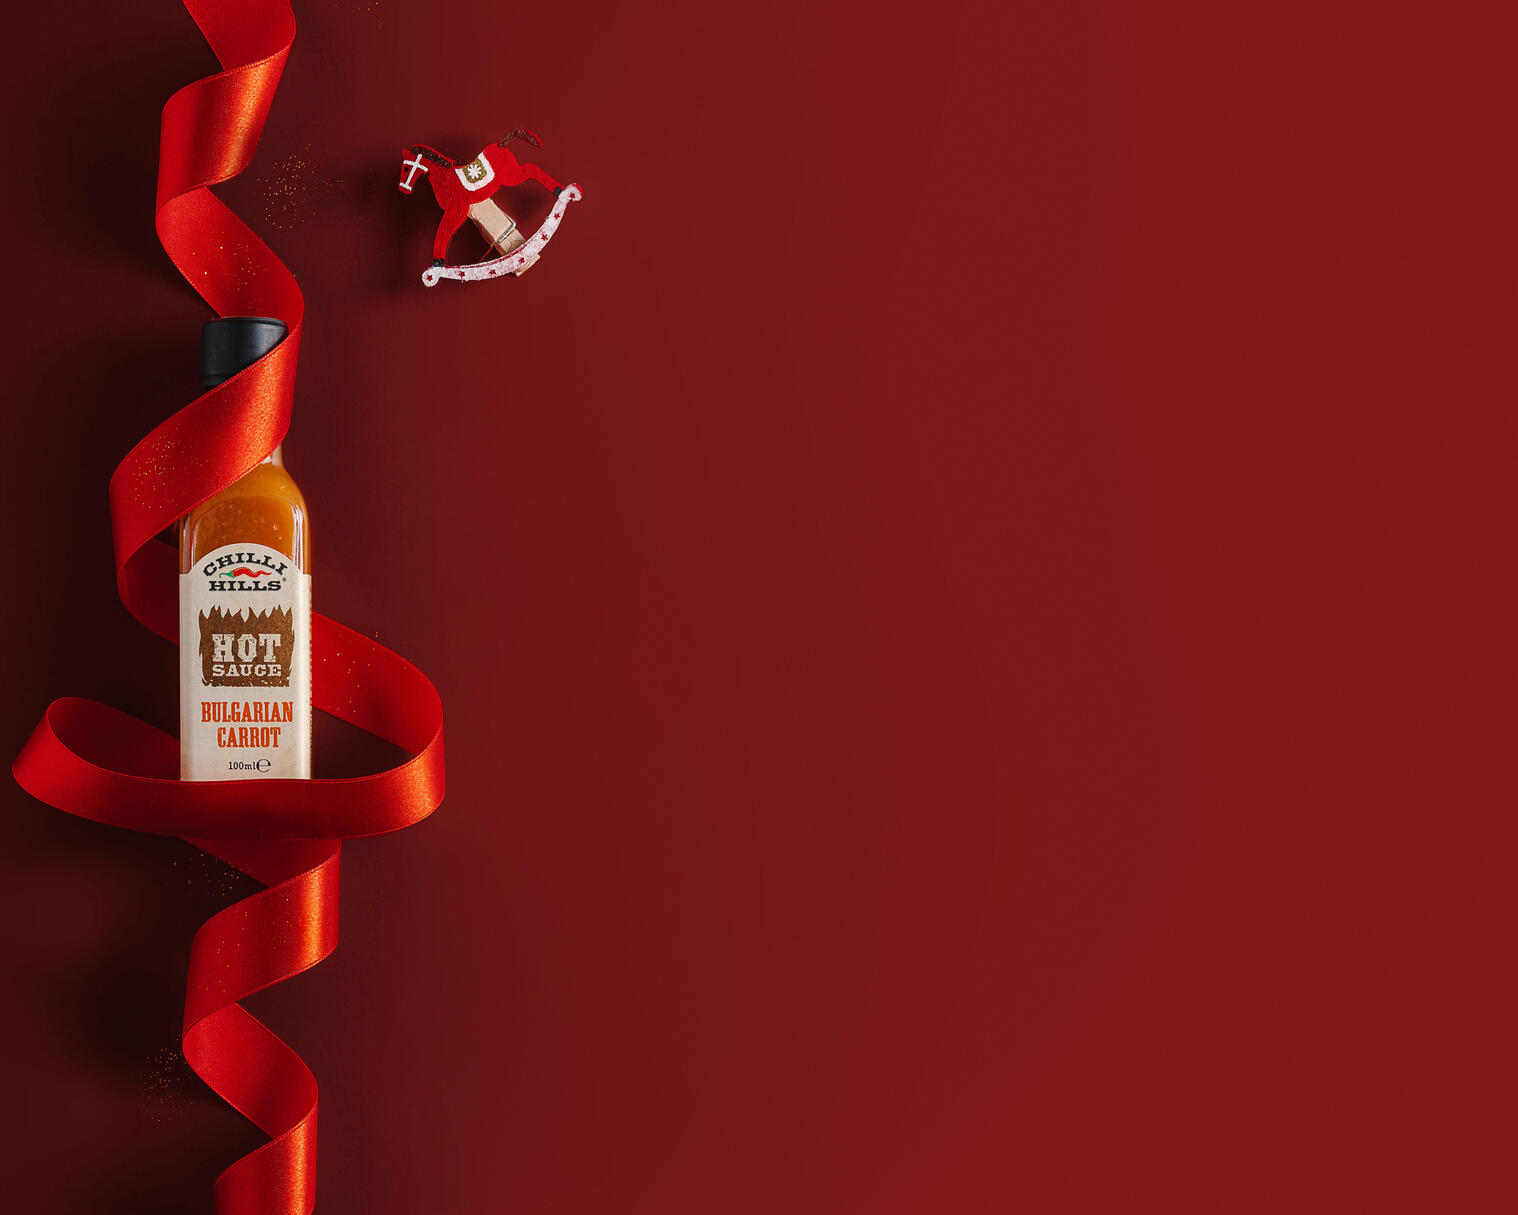 Chilli Hills Bulgarian carrot hot sauce. Christmas mood. On a red background lies a jar of Chilli Hills Bulgarian carrot hot sauce.
A red satin ribbon is wrapped around the jar and sequins are scattered. To the right of the jar, a little above is a clothespin in the shape of a red horse. The satin ribbon lies so that it resembles the shape of a Christmas tree. The entire right side of the picture is free and can be filled with advertising inscriptions.